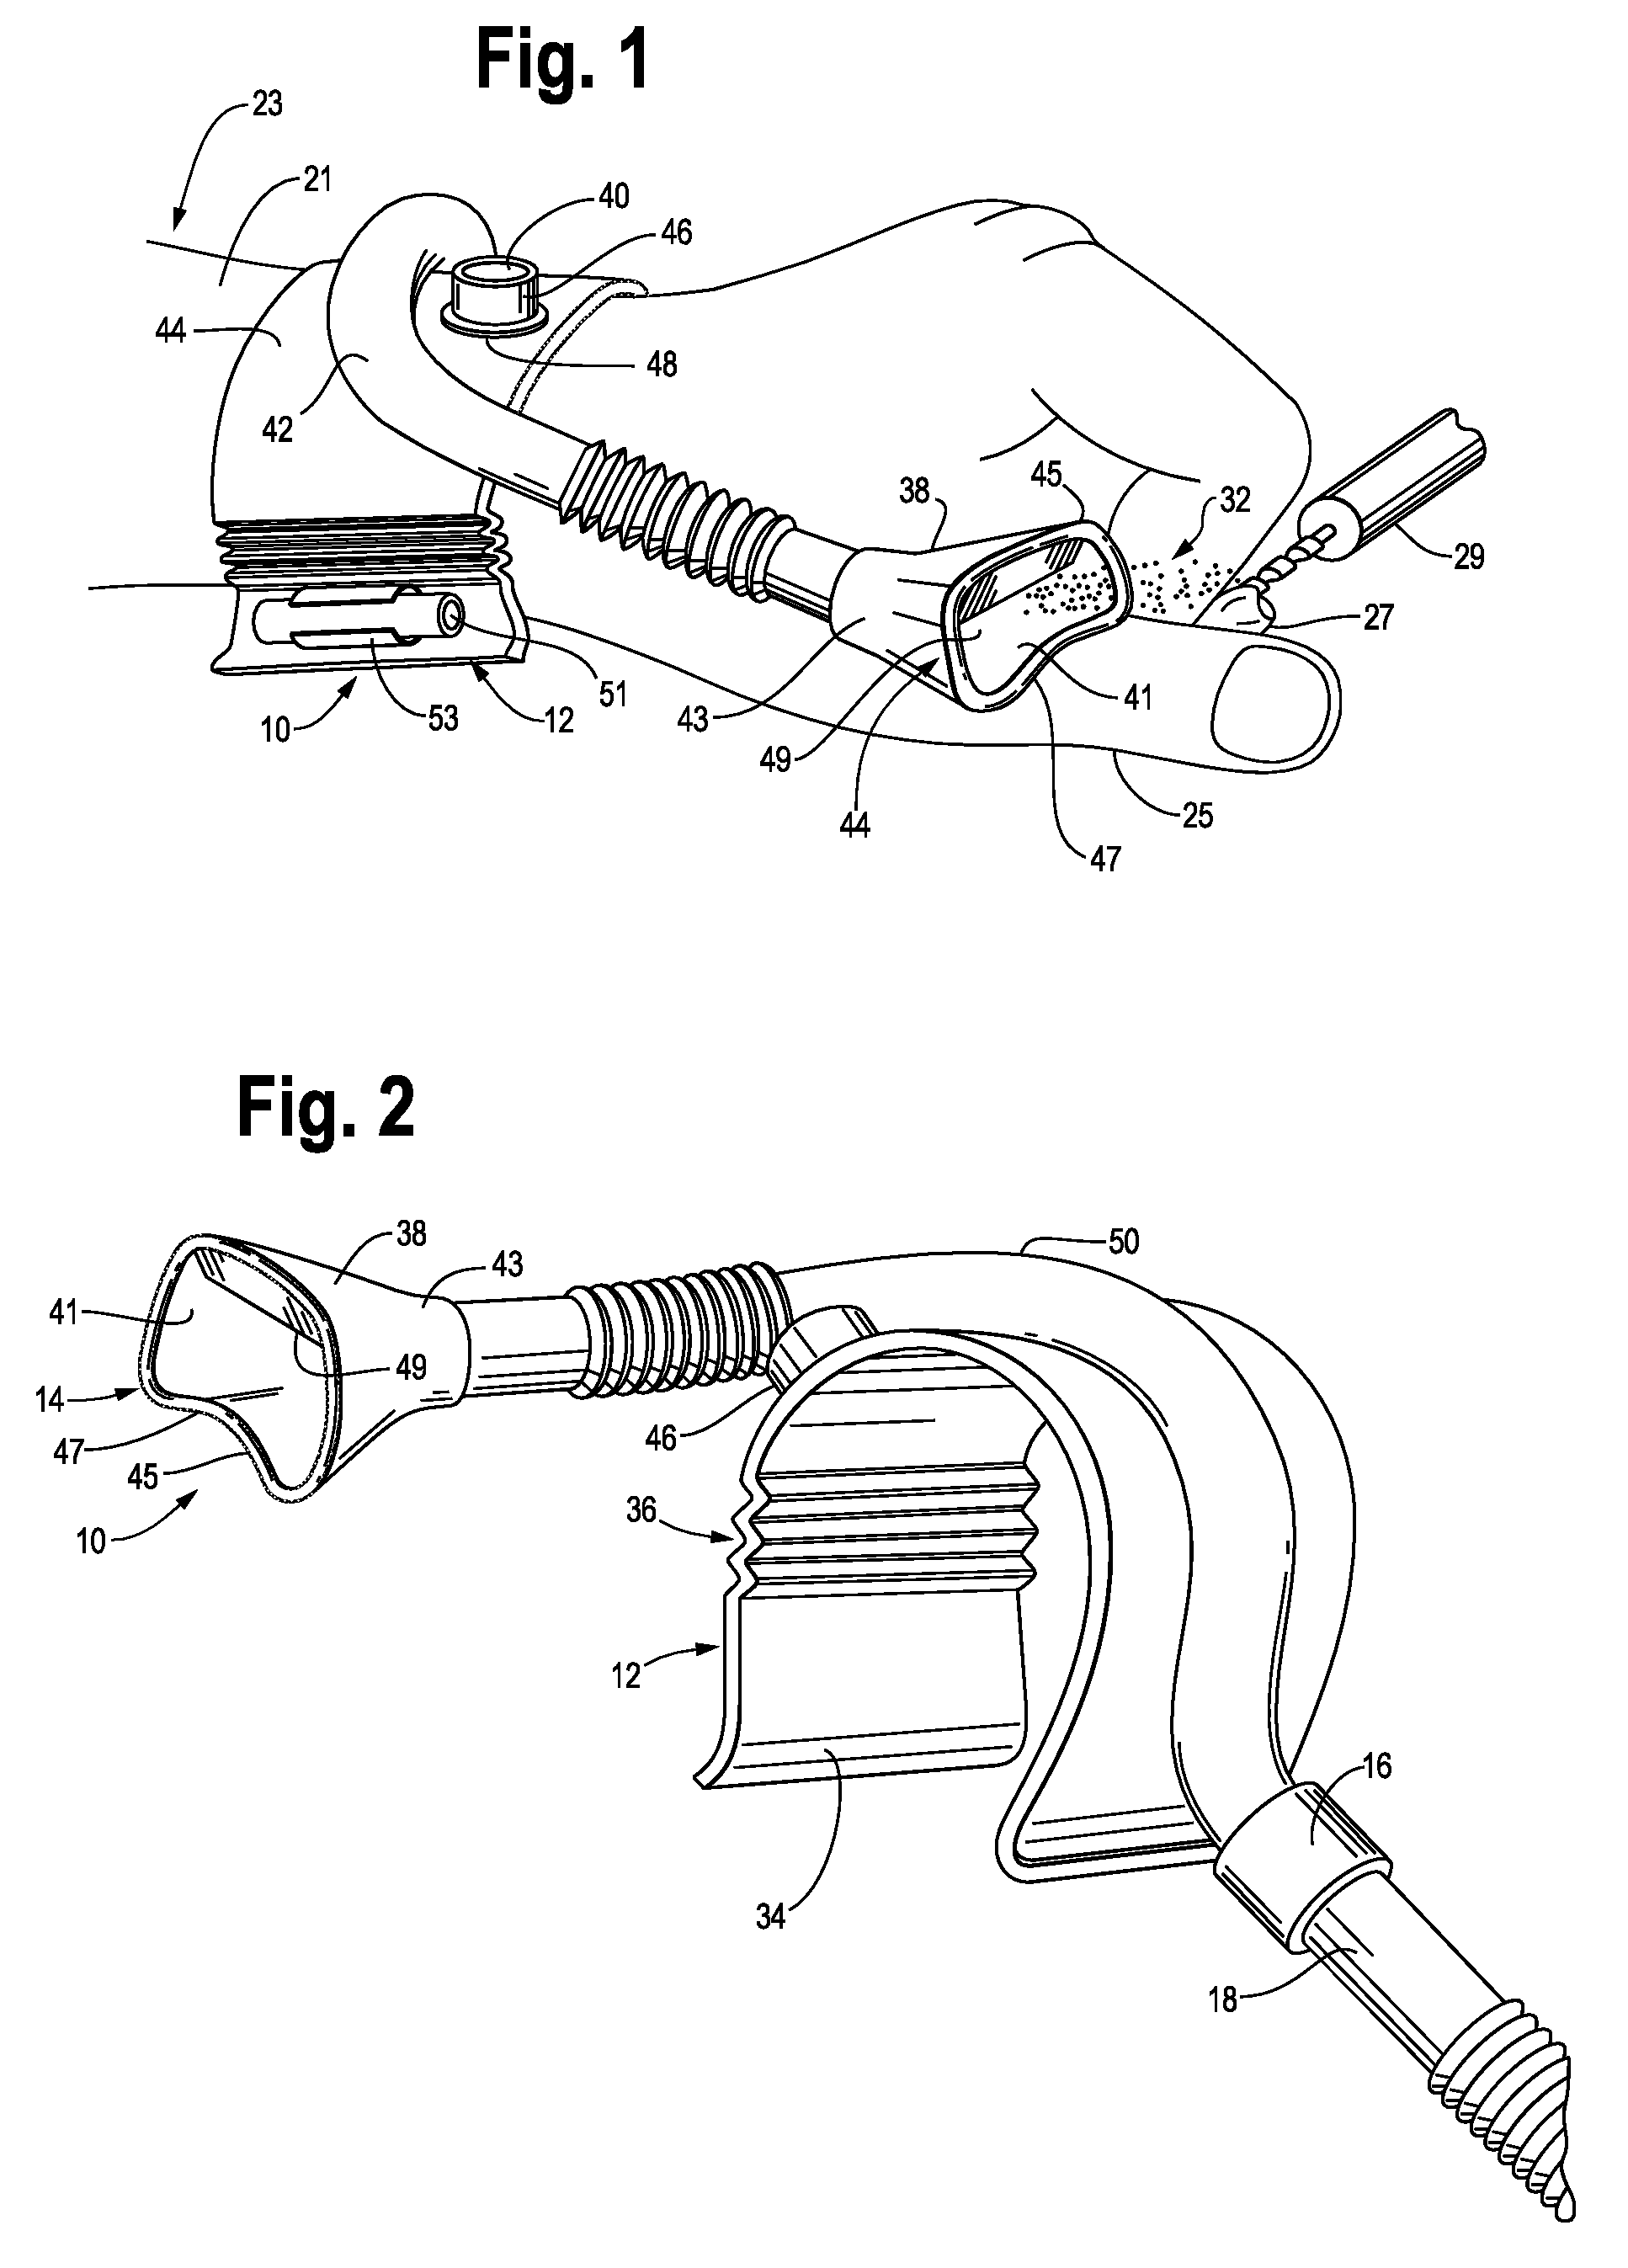 Debris collecting apparatus and methods of making and using the same